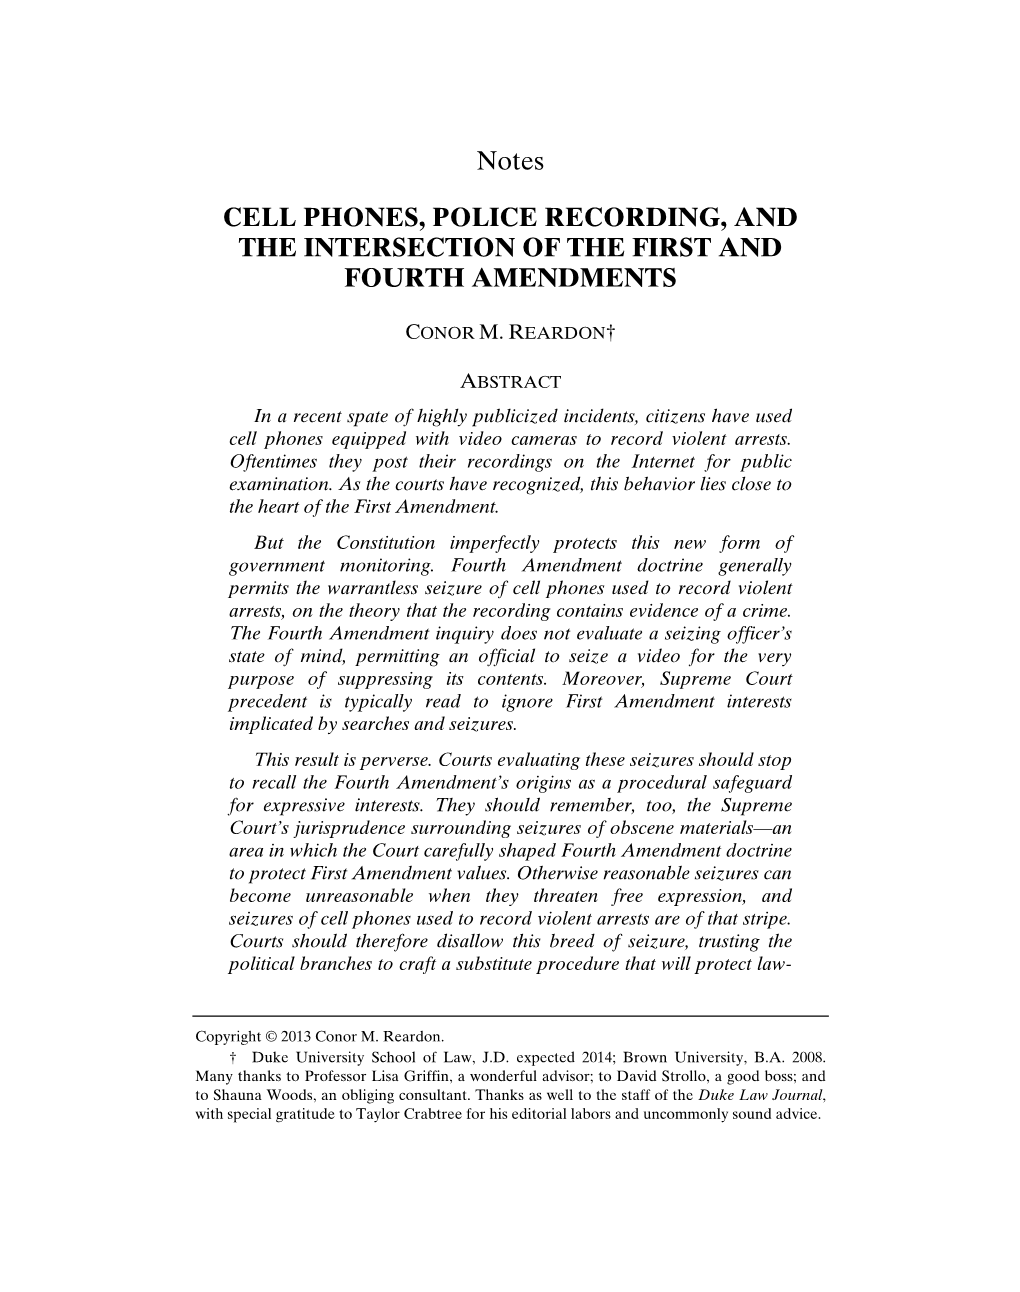 Cell Phones, Police Recording, and the Intersection of the First and Fourth Amendments